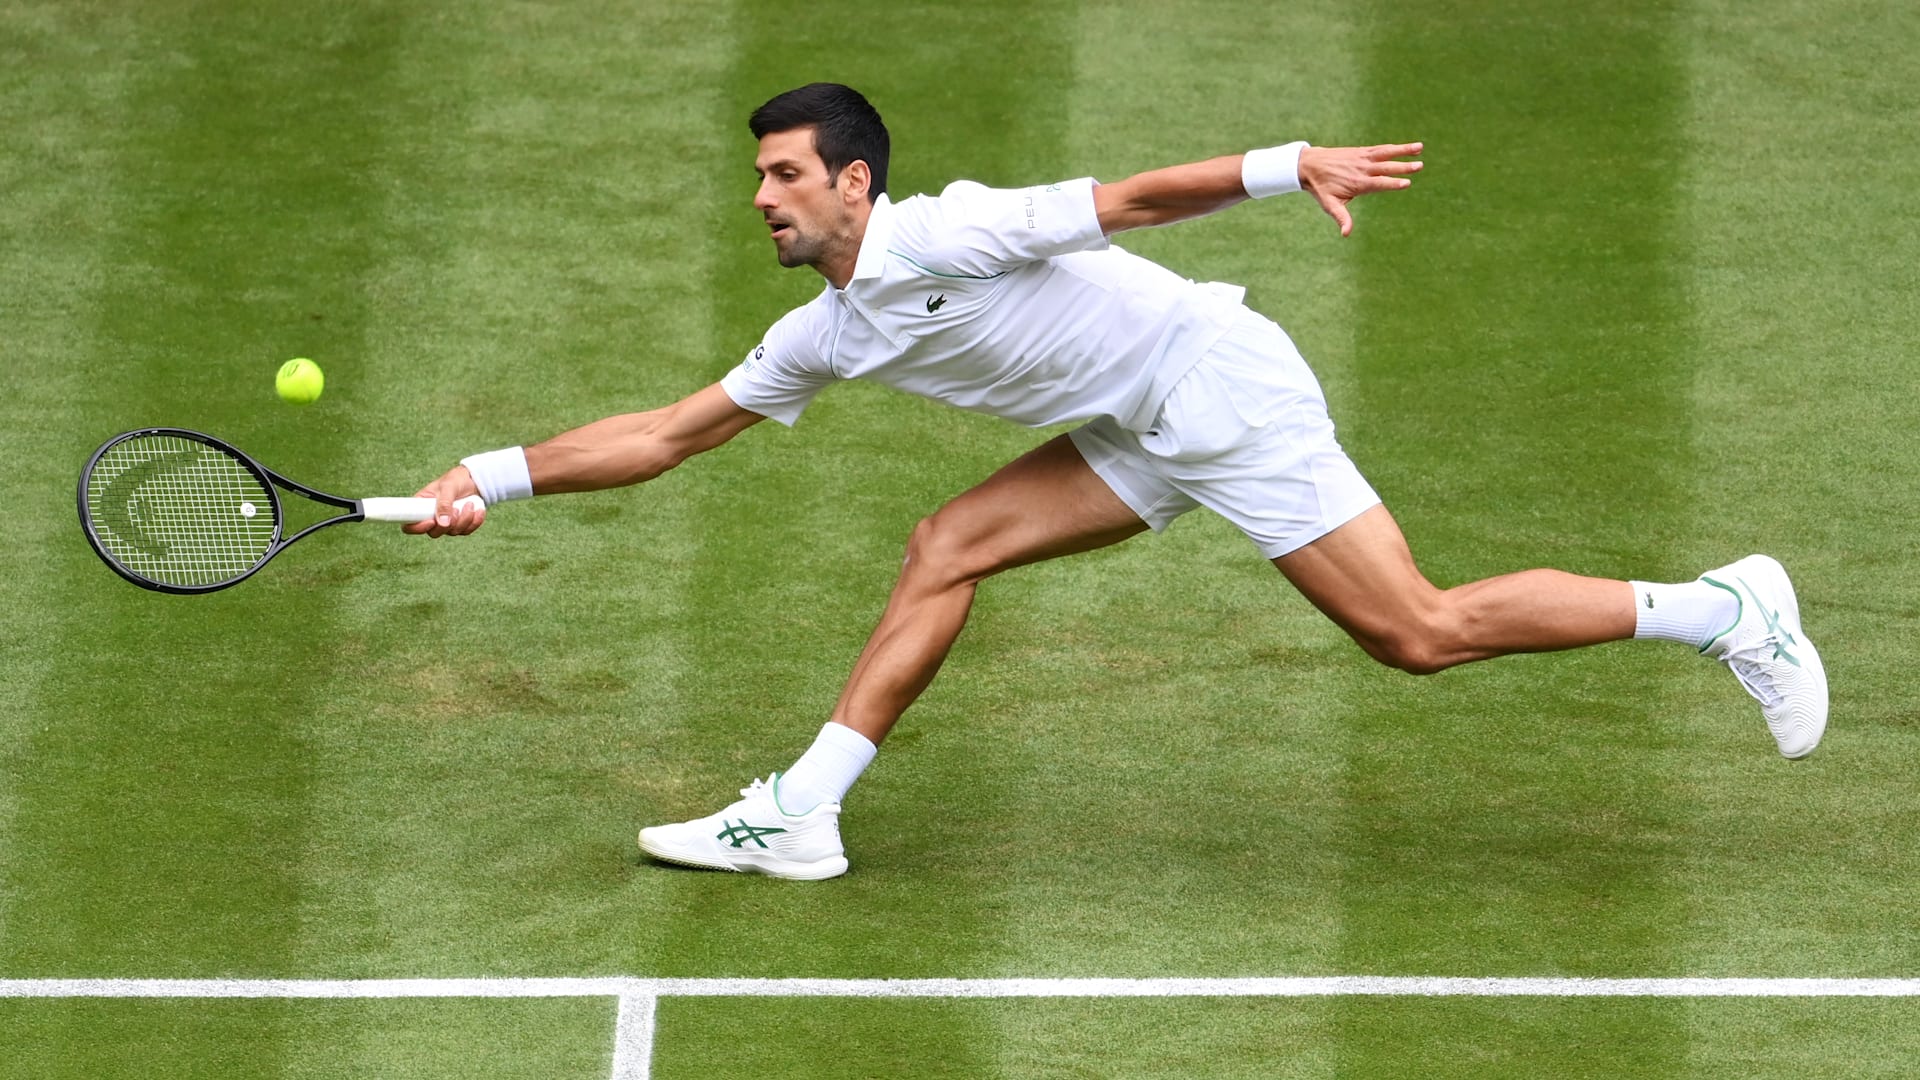 Wimbledon 2022 Watch live streaming and telecast in India